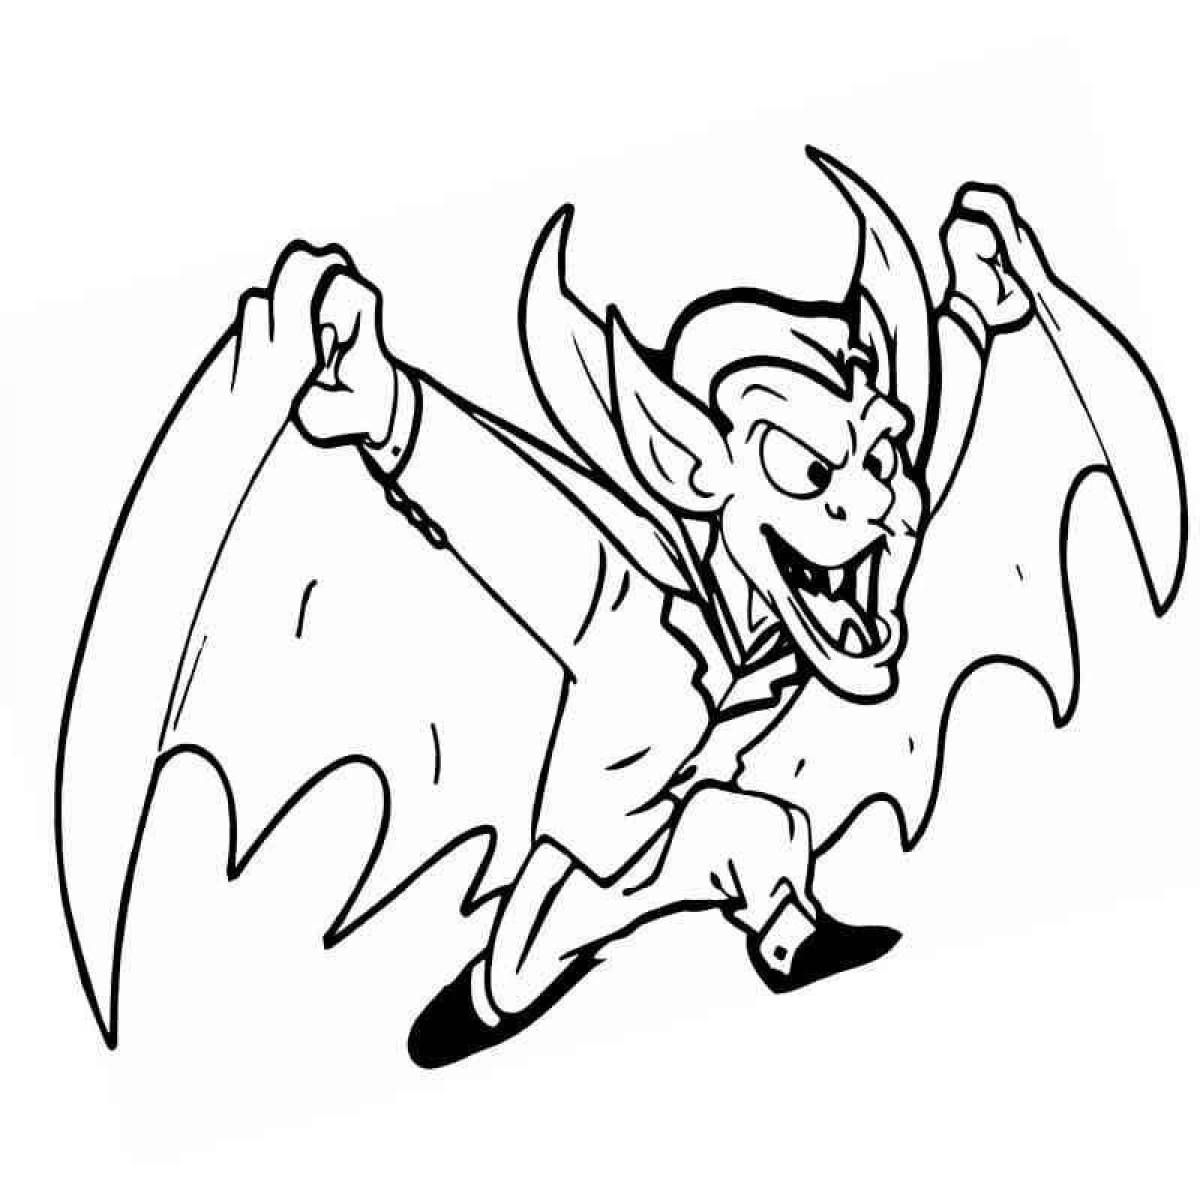 Weird vampire coloring page